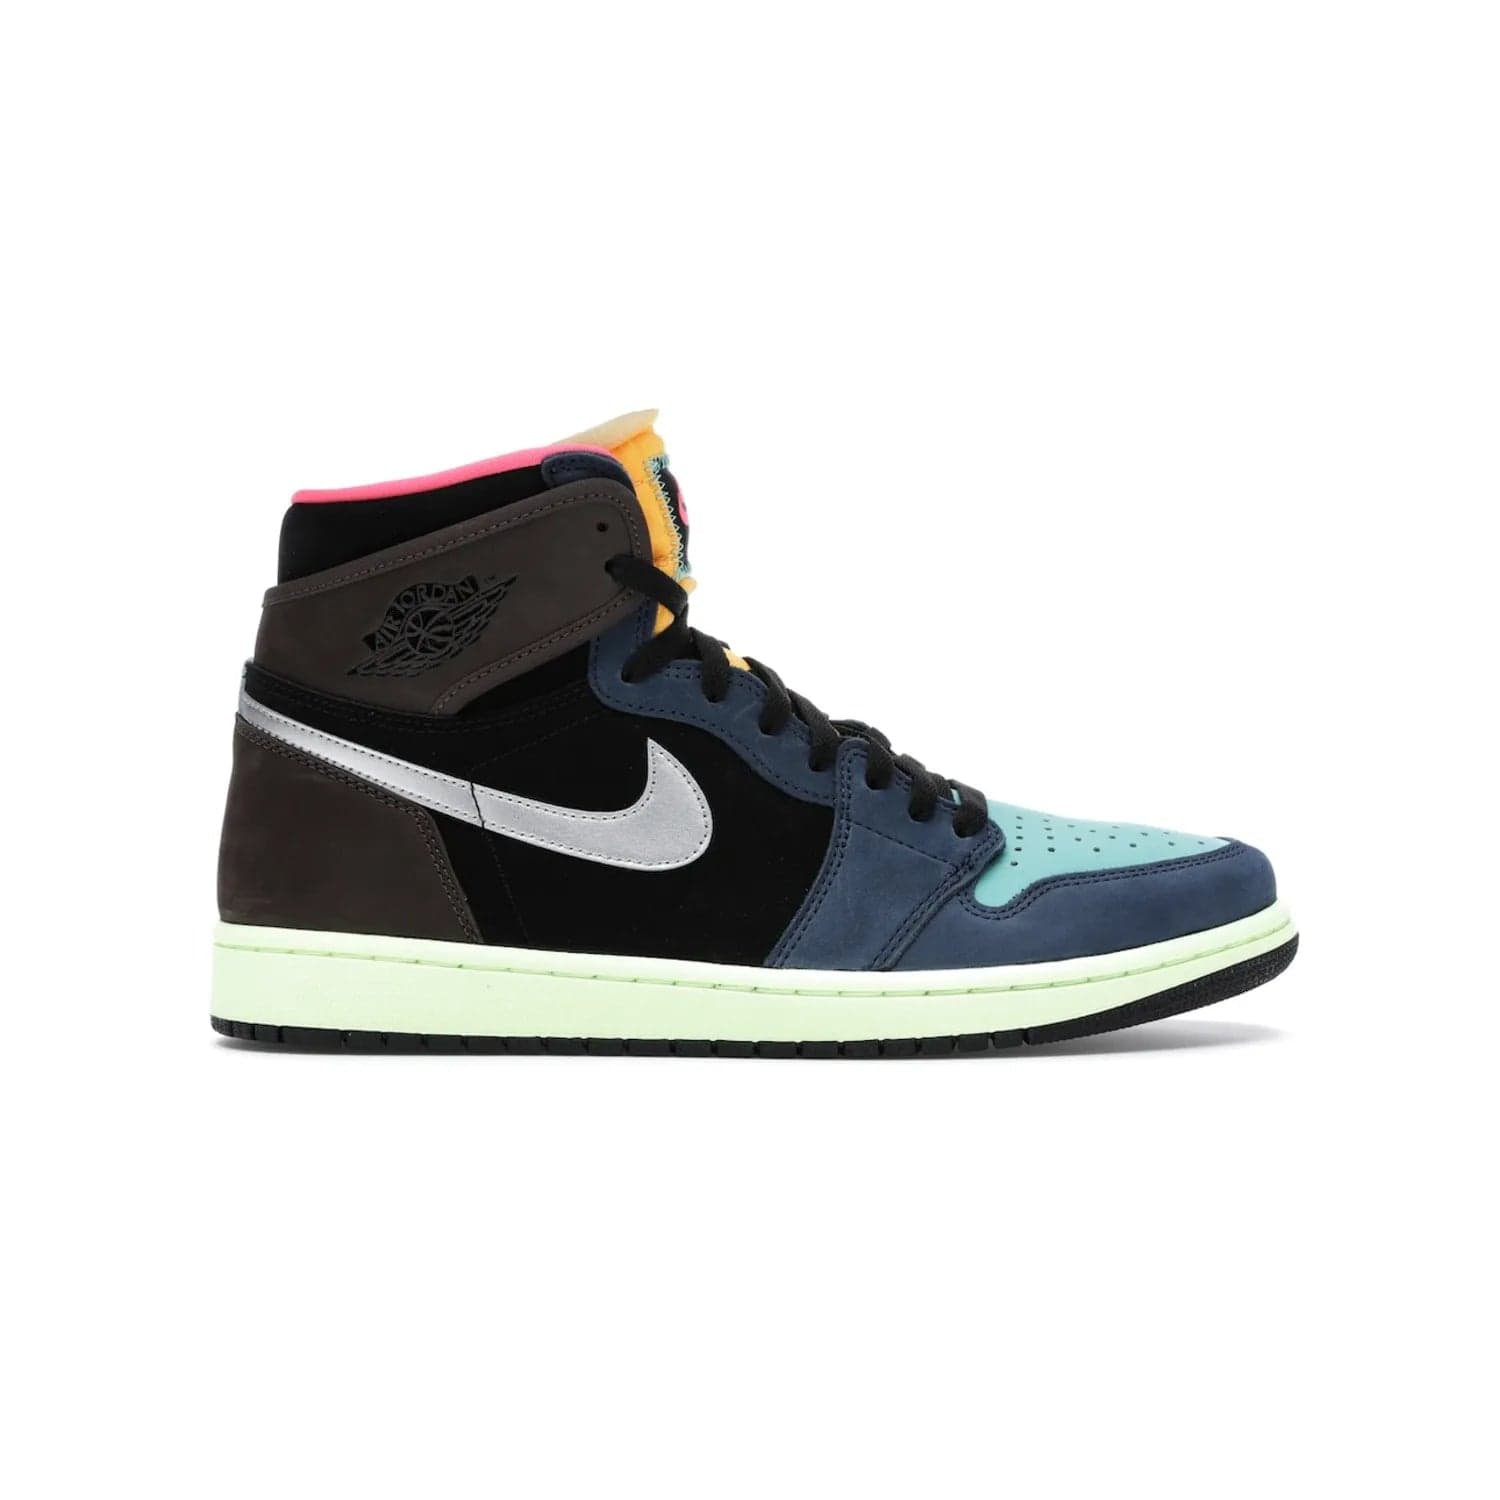 Jordan 1 Retro High Tokyo Bio Hack - Image 1 - Only at www.BallersClubKickz.com - Step up your sneaker game with the Air Jordan 1 Retro High Tokyo Bio Hack! Unique design featuring multiple materials and eye-catching colors. Metallic leather Swoosh and light green midsole for a stunning look. Available now for just $170.